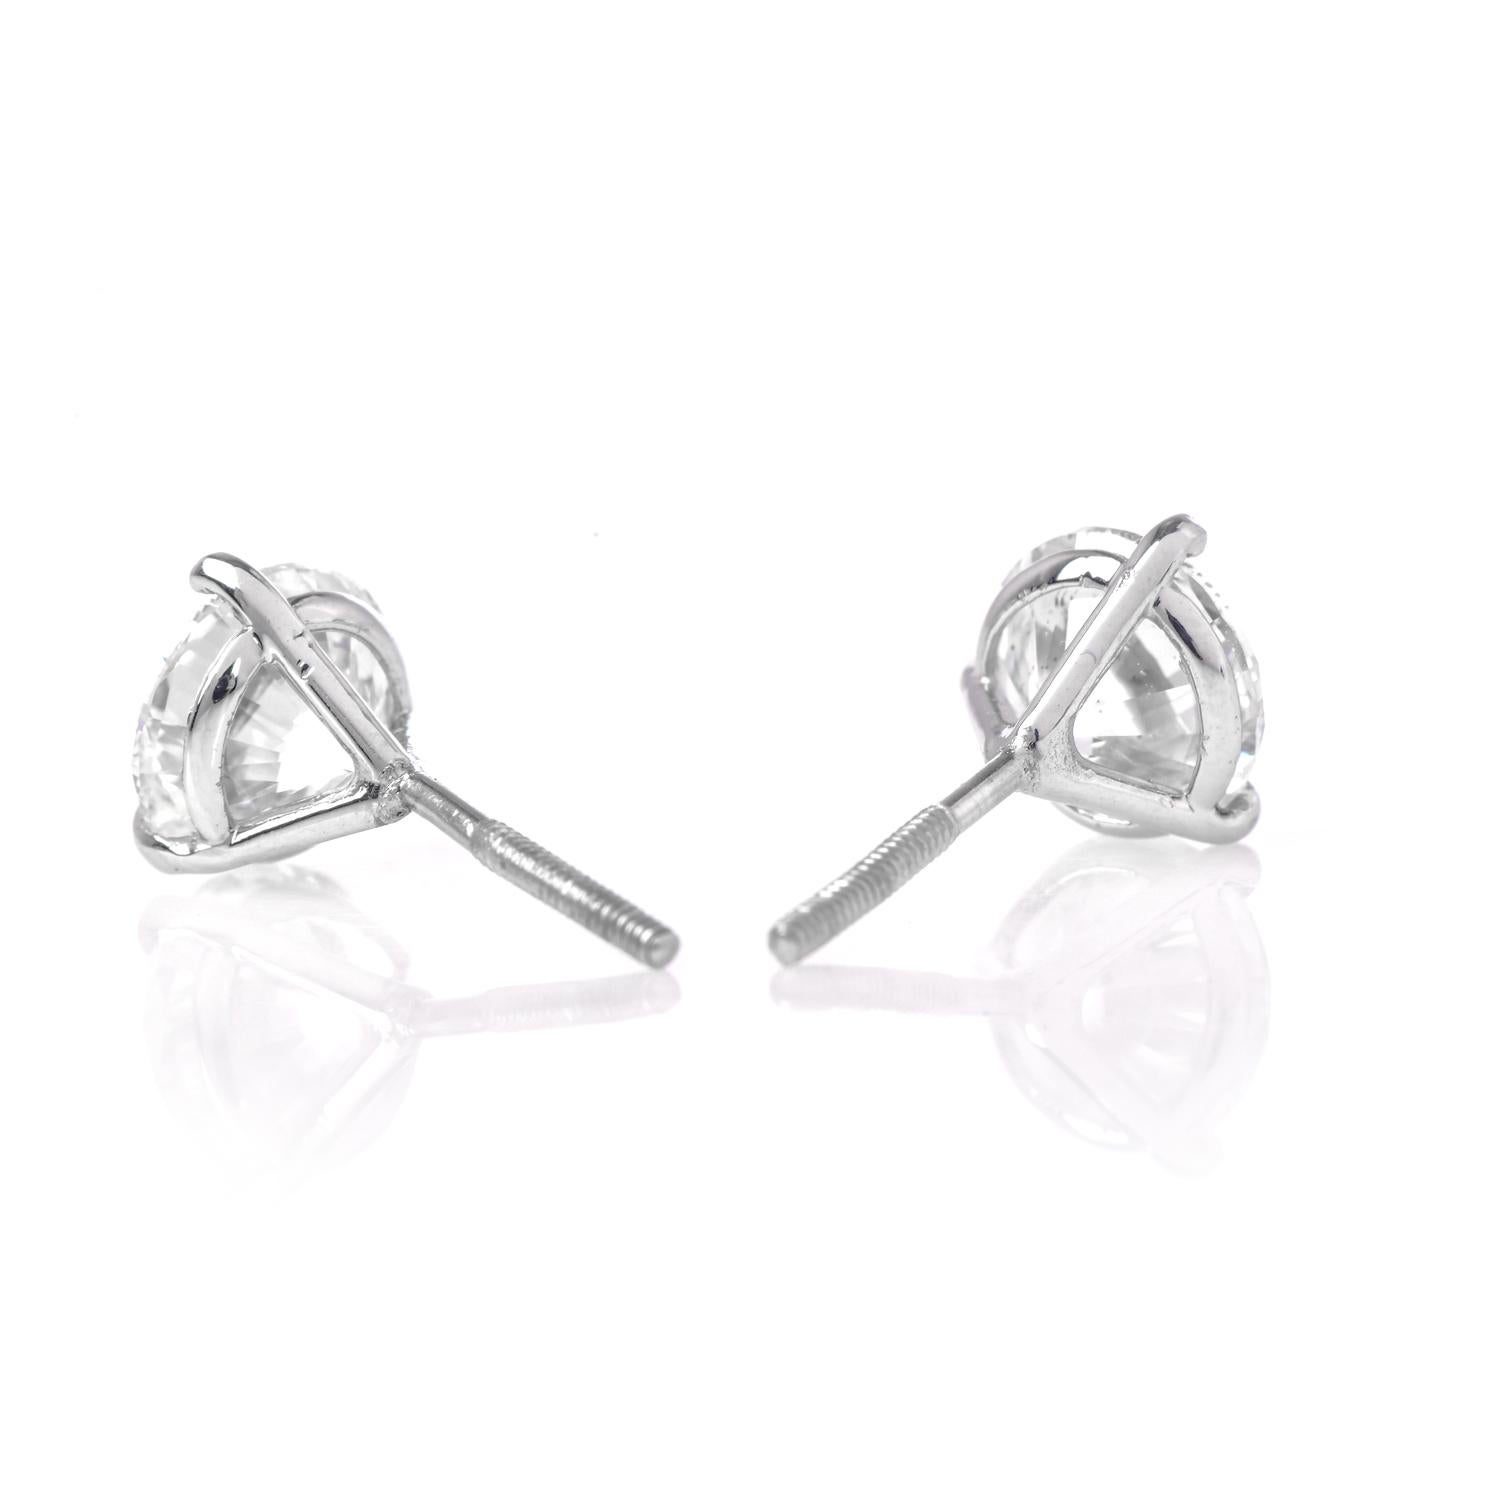 Natural Brilliant Round Cut Diamonds prong set in 14K white gold stud earrings 1.50 carat each.

Secured with Screw Backs for Pierced Ears.

Metal: 14K White Gold

GIA REPORT 6234021515

Shape: Brilliant Round

Carat Weight: 1.50 carat

Clarity and